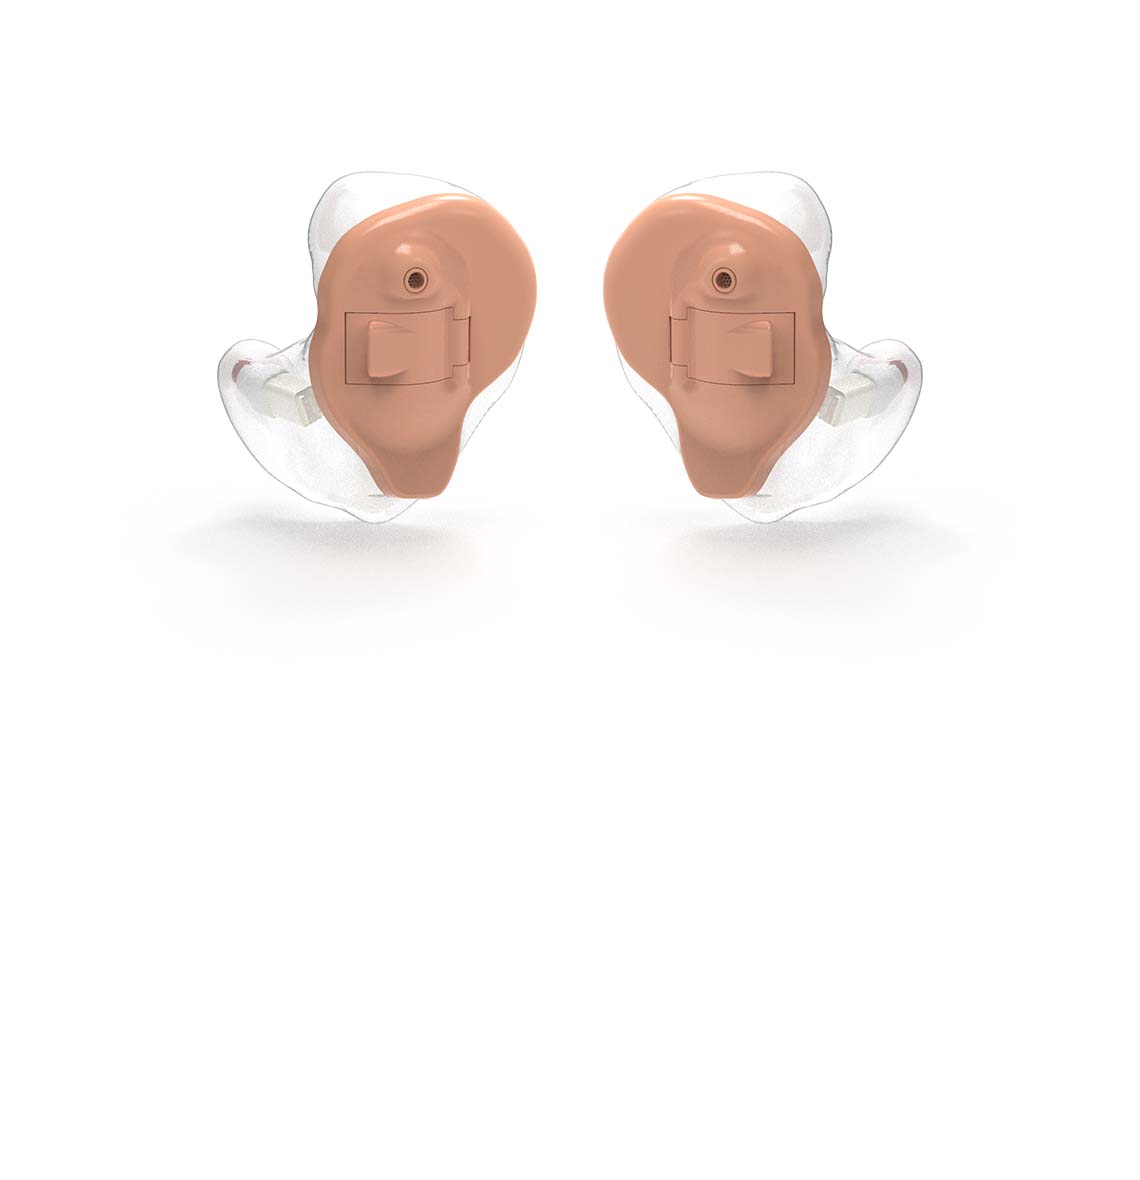 A pair of ITE hearing aids